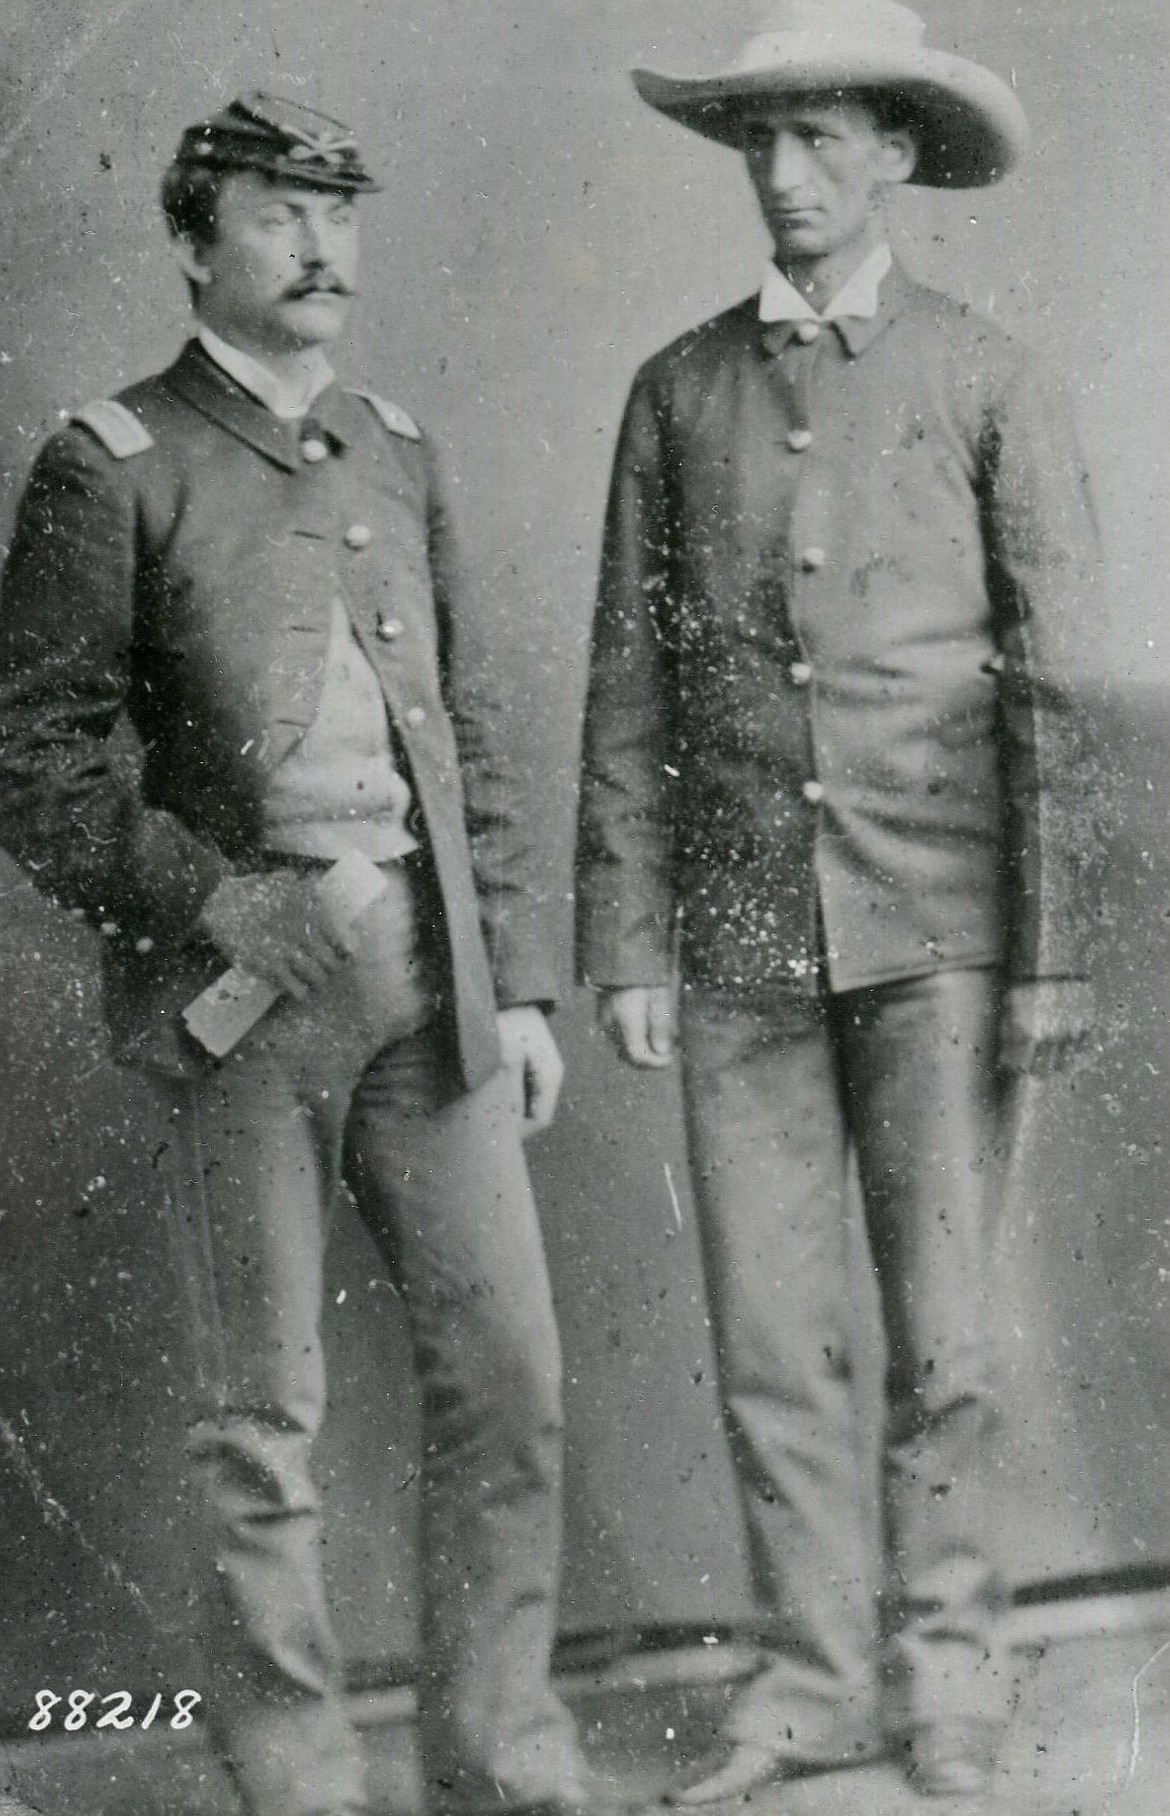 U.S. Army Lieutenant Charles B. Gatewood (right) who negotiated Geronimo’s surrender in 1886, shown here with Lieutenant M.F. Goodwin, 10th Cavalry.